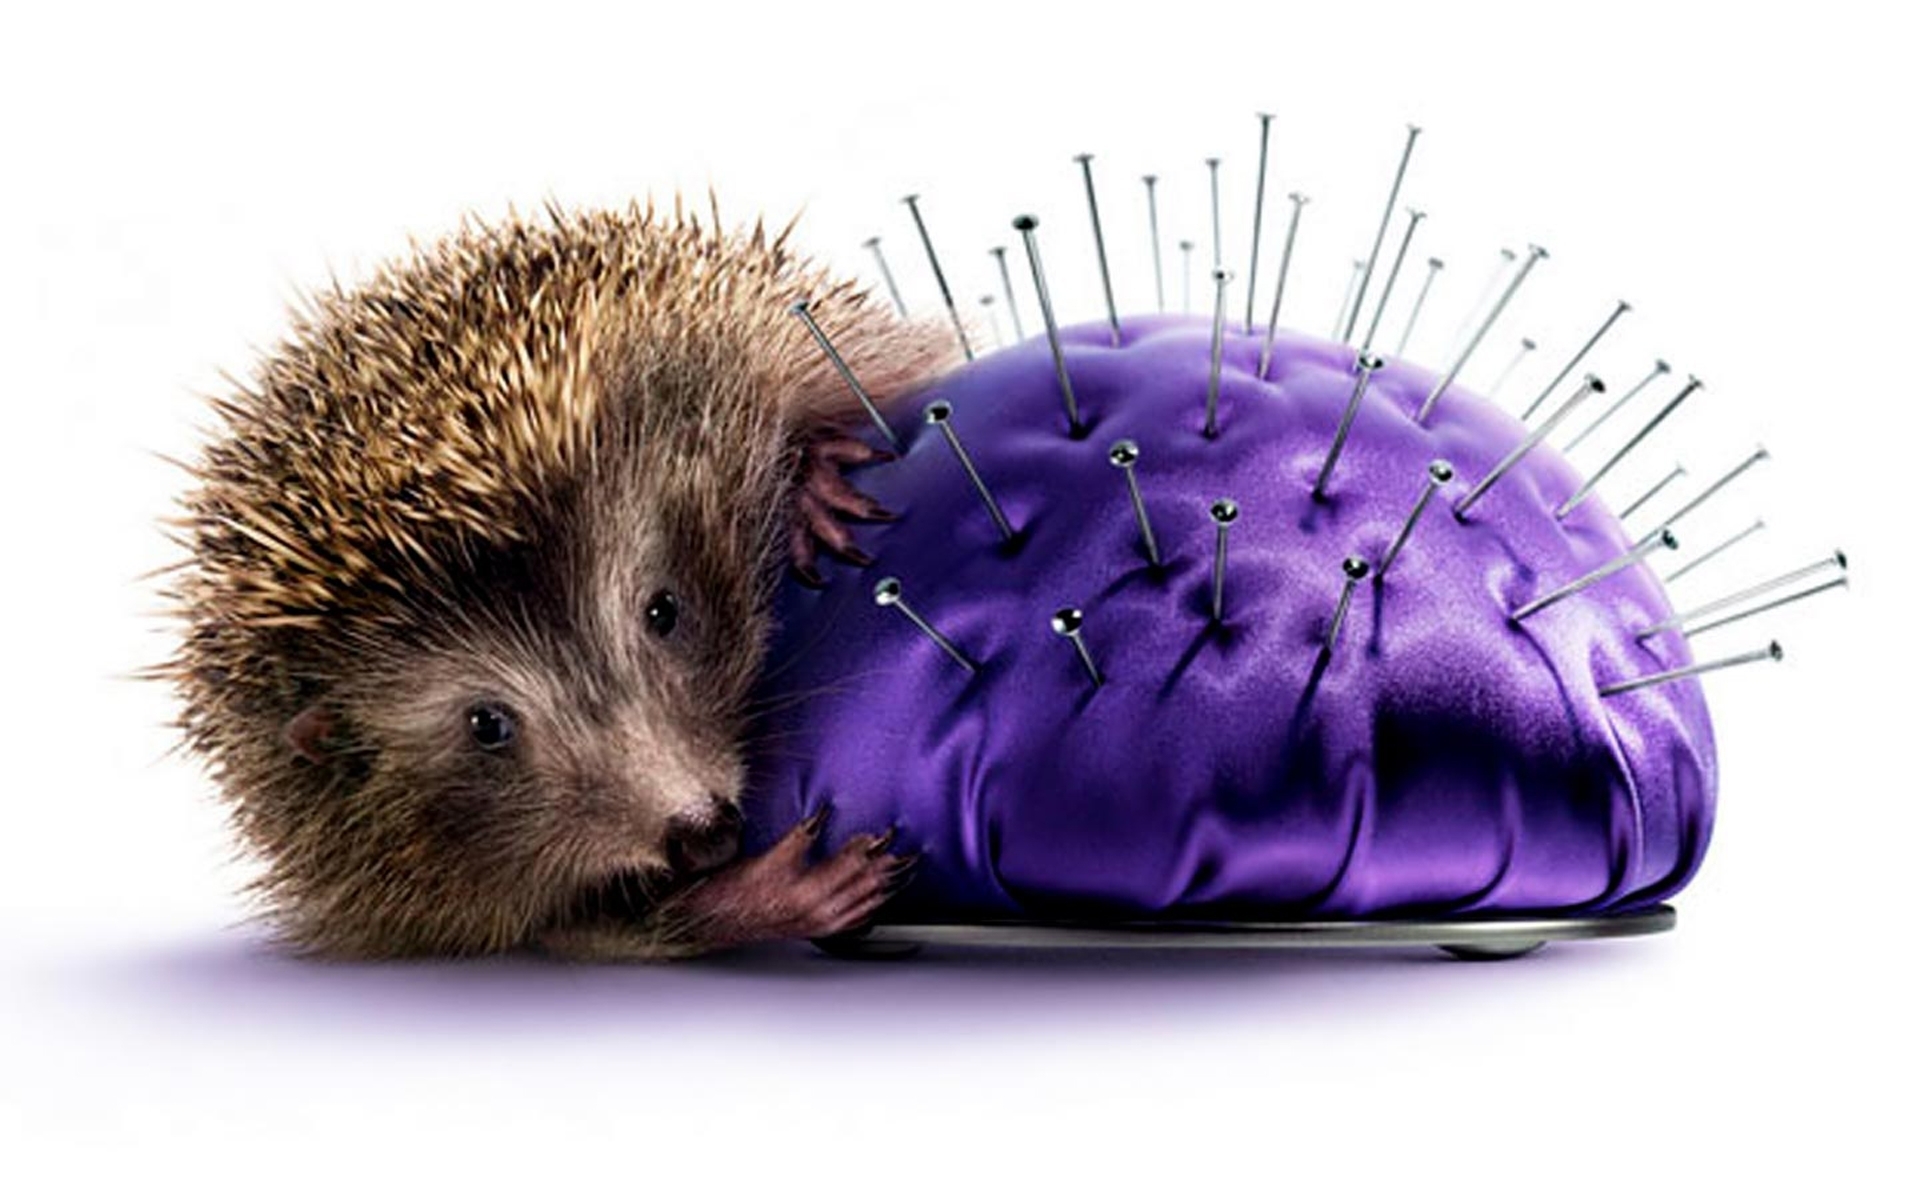 animals, hedgehogs, objects